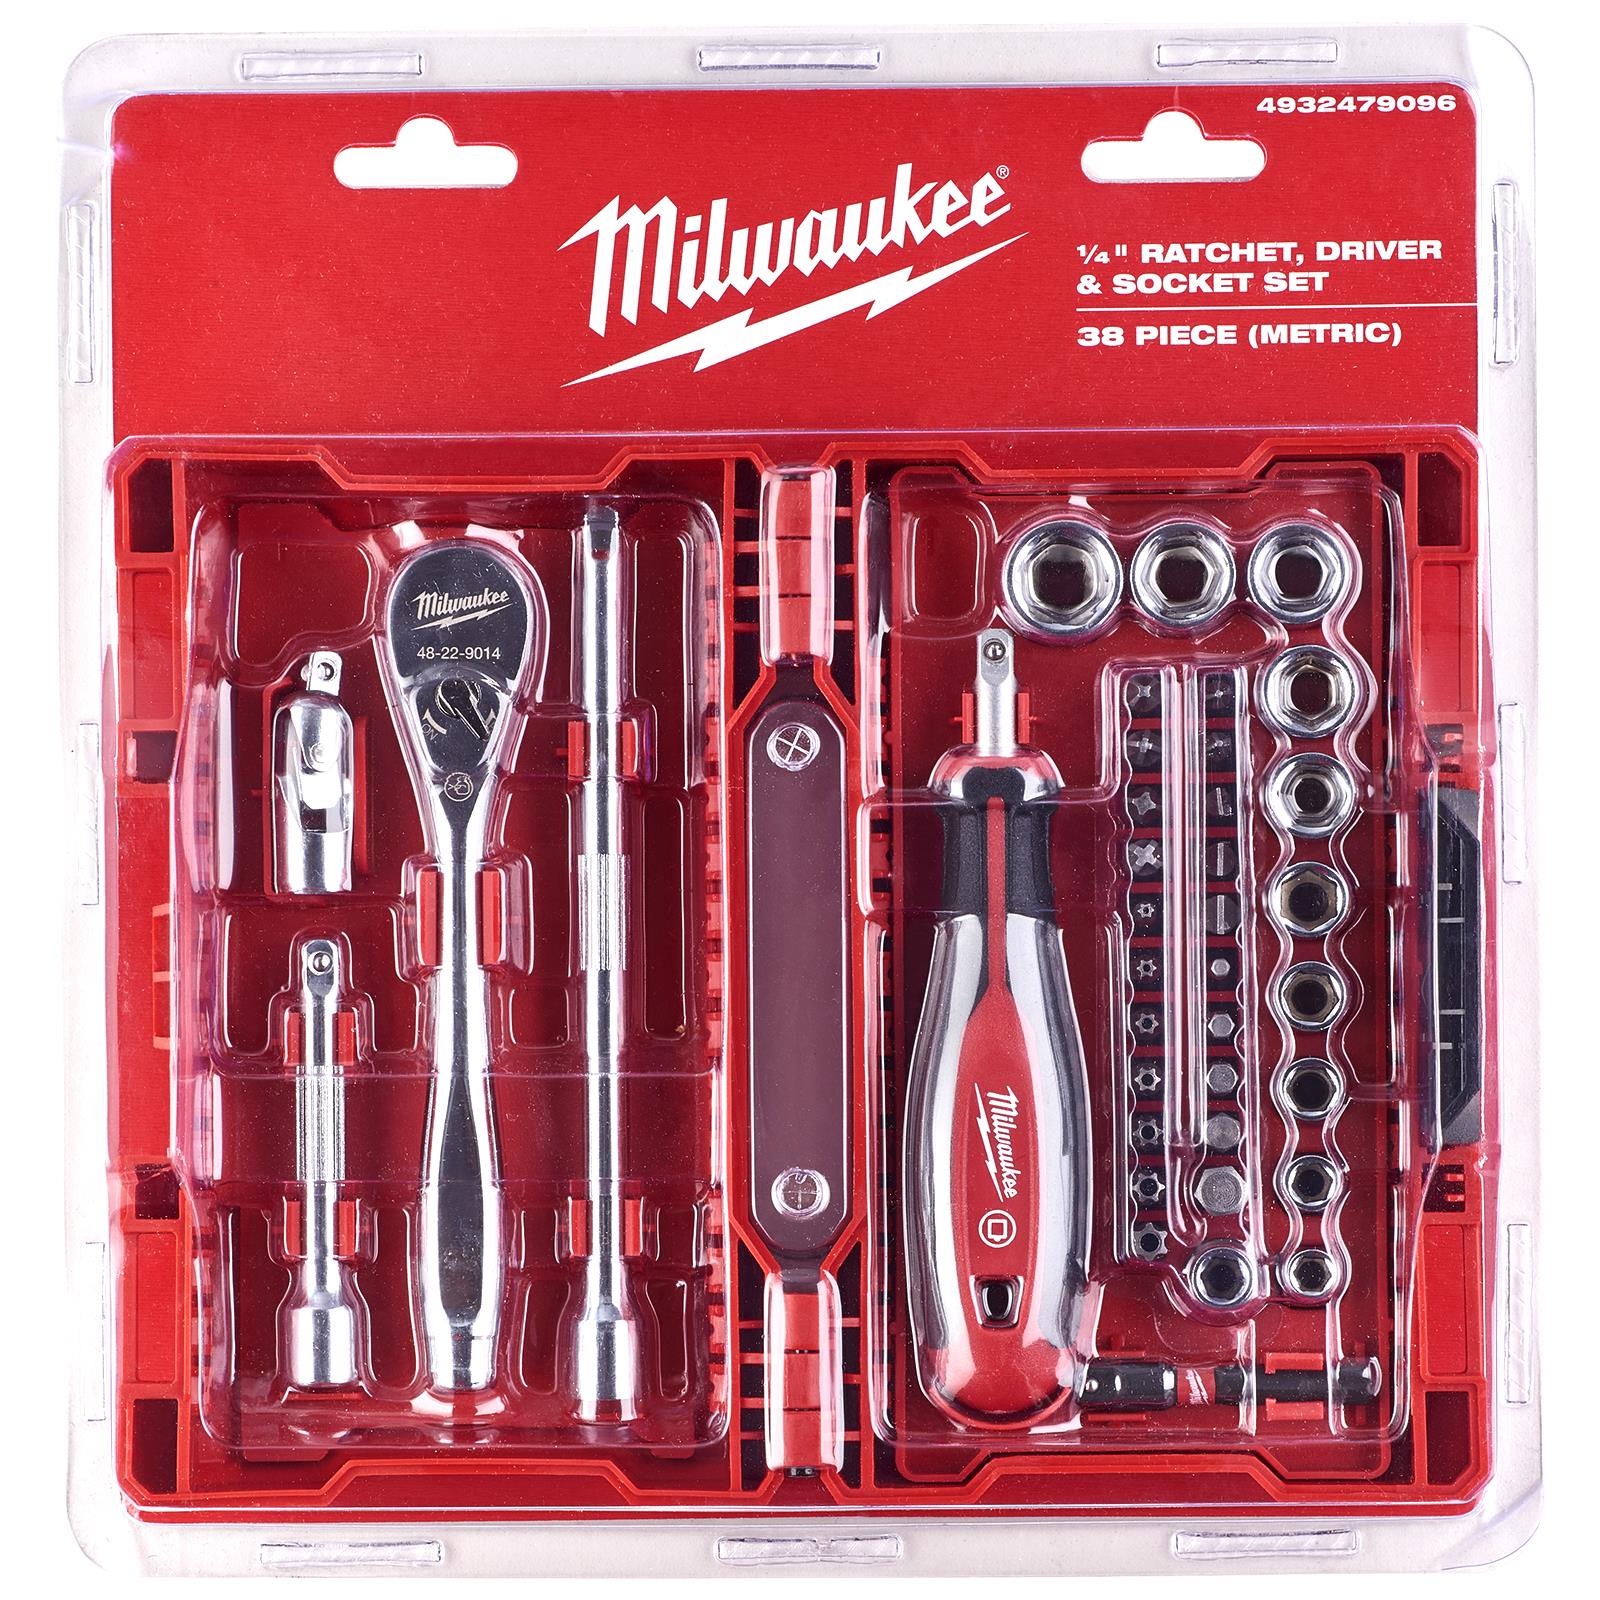 Milwaukee Ratchet Wrench Driver and Socket Set 1/4" in Case 90 Tooth Handle